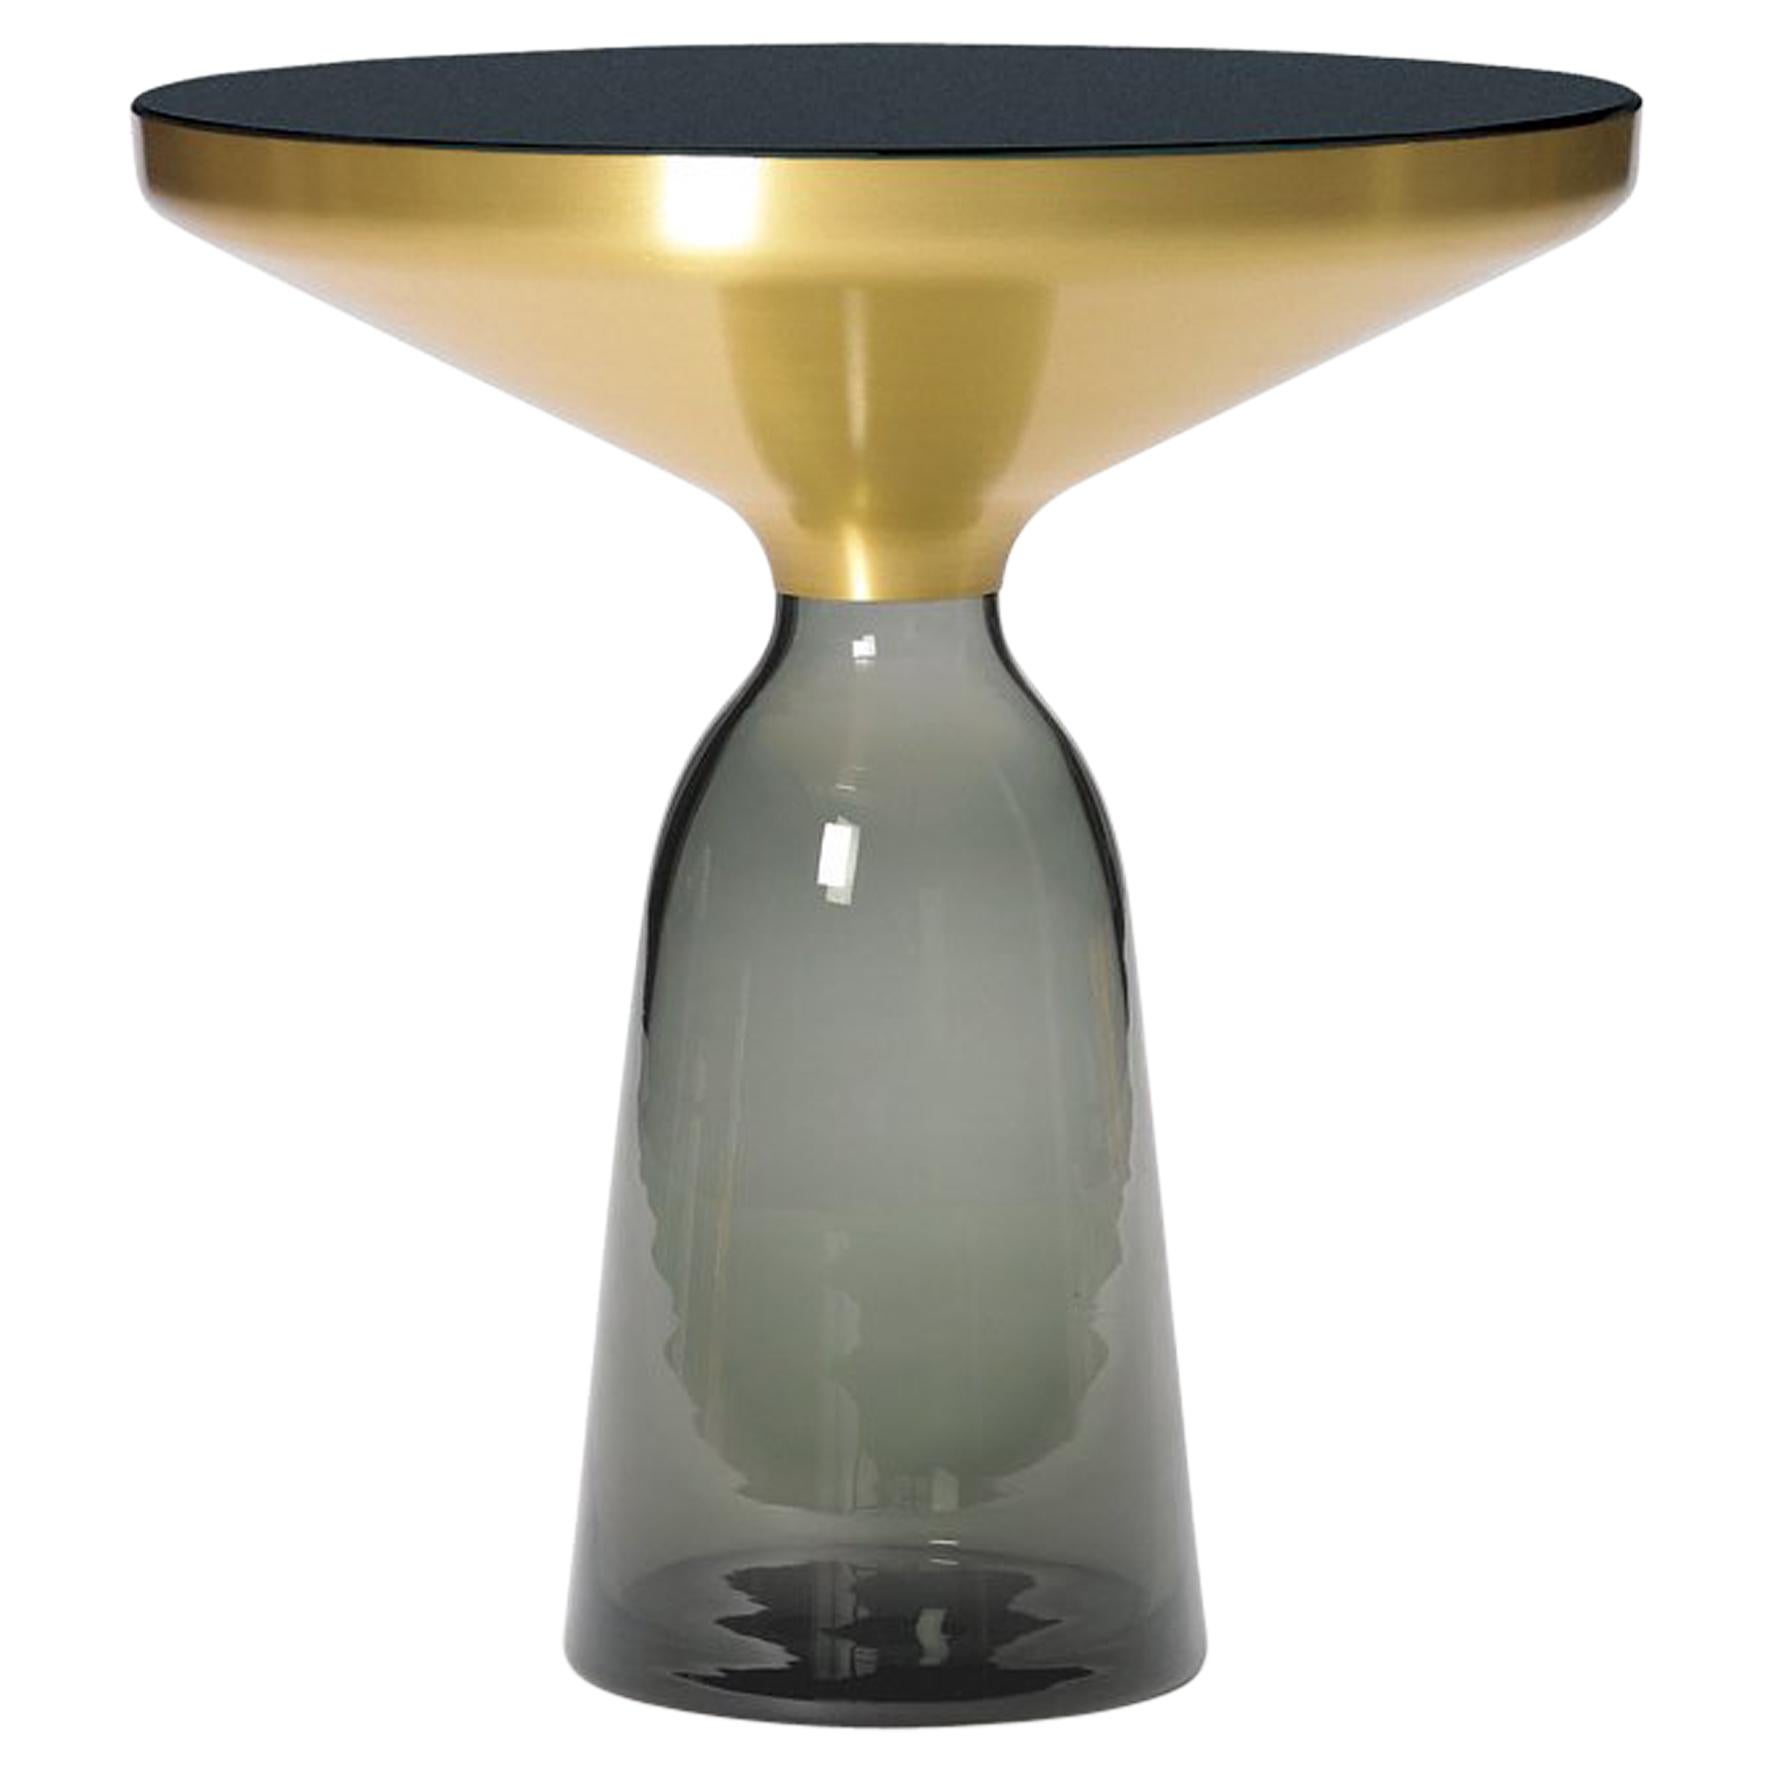 ClassiCon Bell Side Table in Brass and Quartz Grey by Sebastian Herkner For Sale